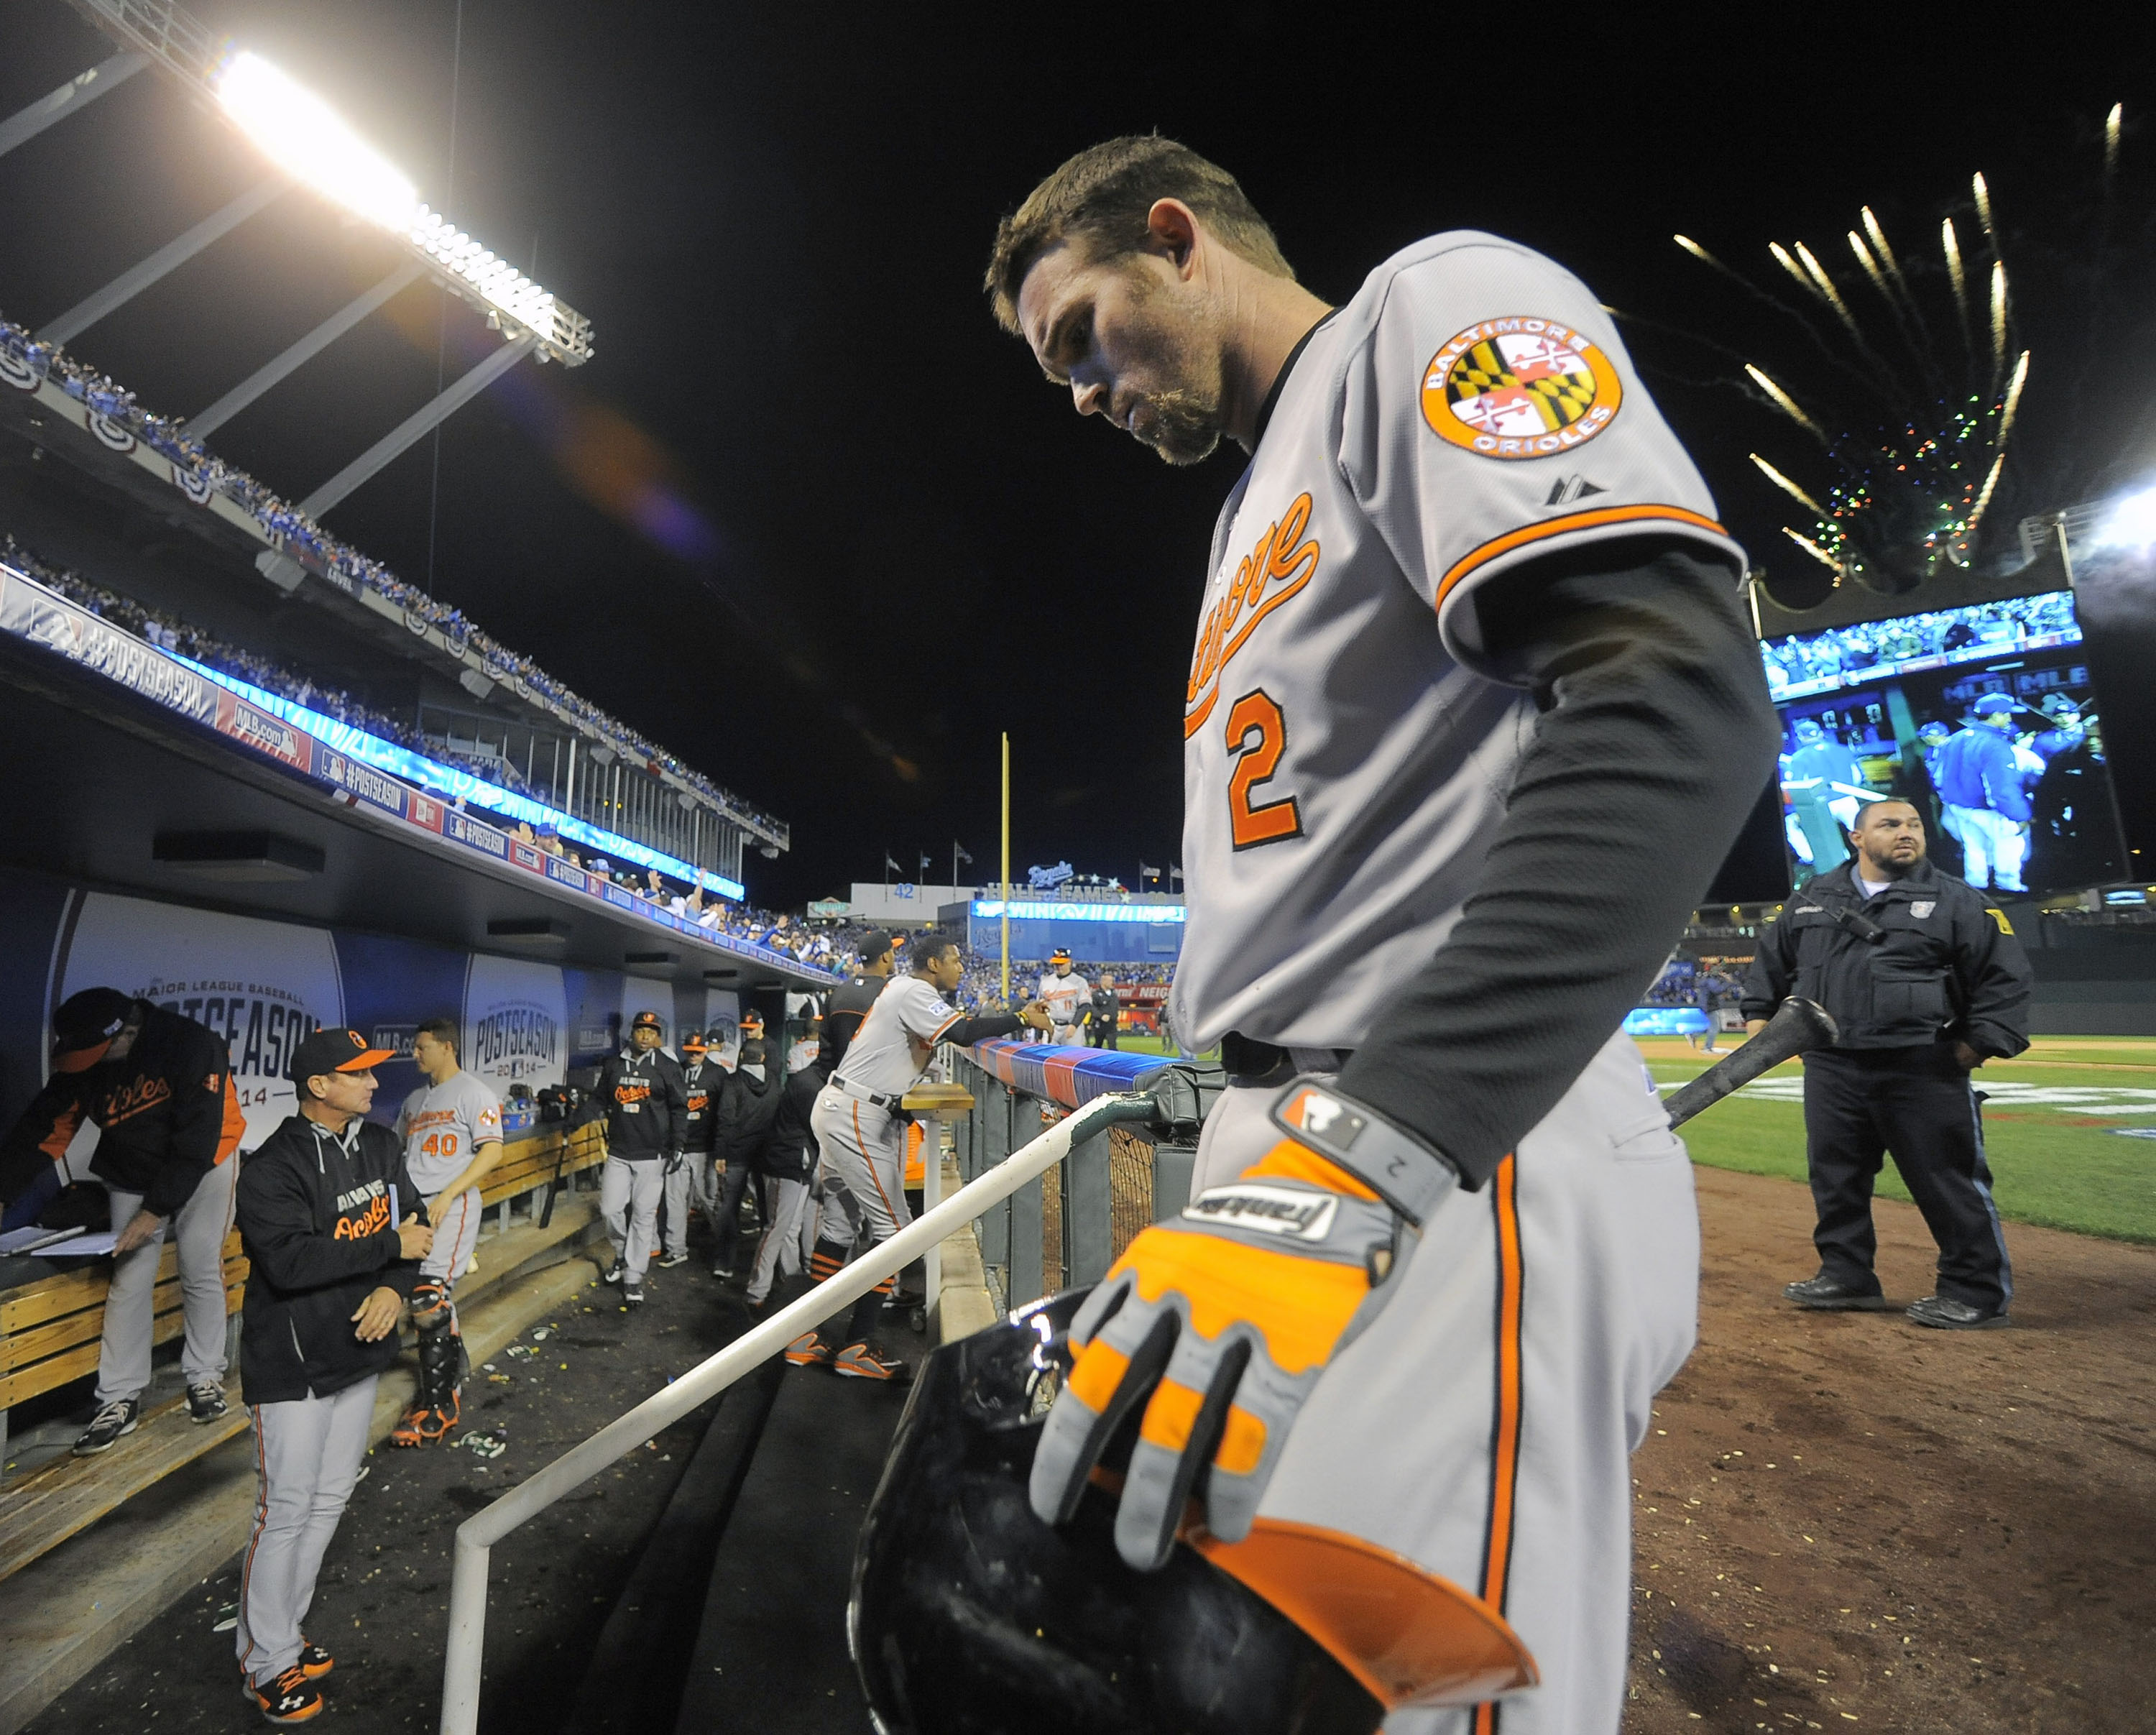 The Baltimore Orioles' J.J. Hardy returns to the clubhouse as fireworks shoot above the ballpark while the Kansas City Royals celebrate a 2-1 win in game three of the American League Championship Series. Photo: MCT  